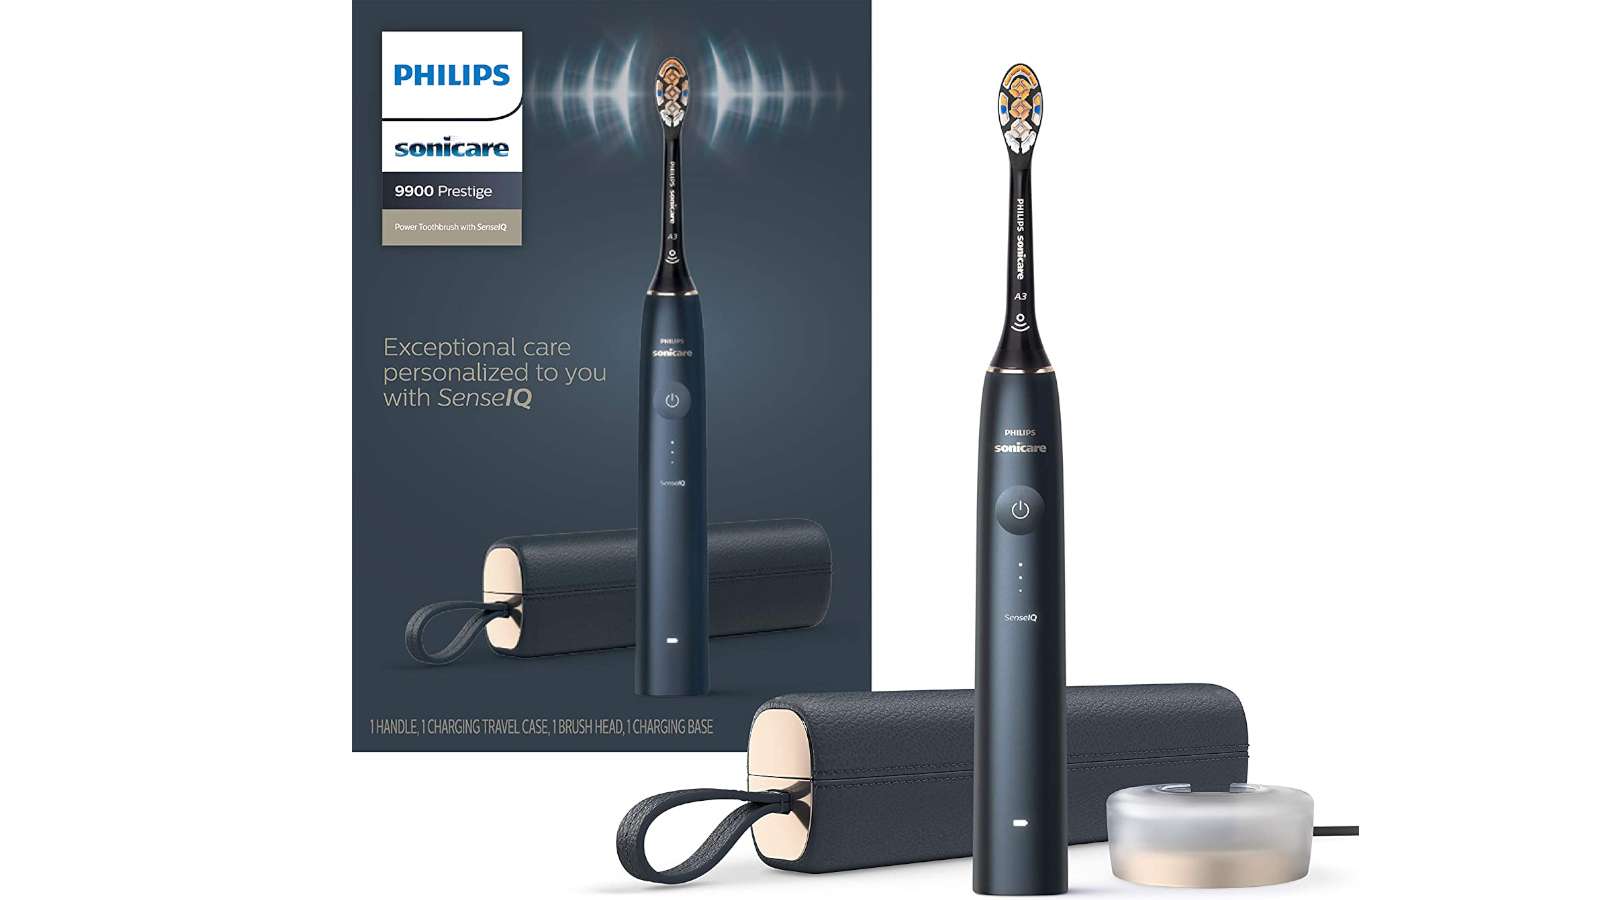 reviews on best philips sonicare toothbrushes - Philips Sonicare 9900 Prestige (Midnight, HX9990/12) toothbrush and its packaging